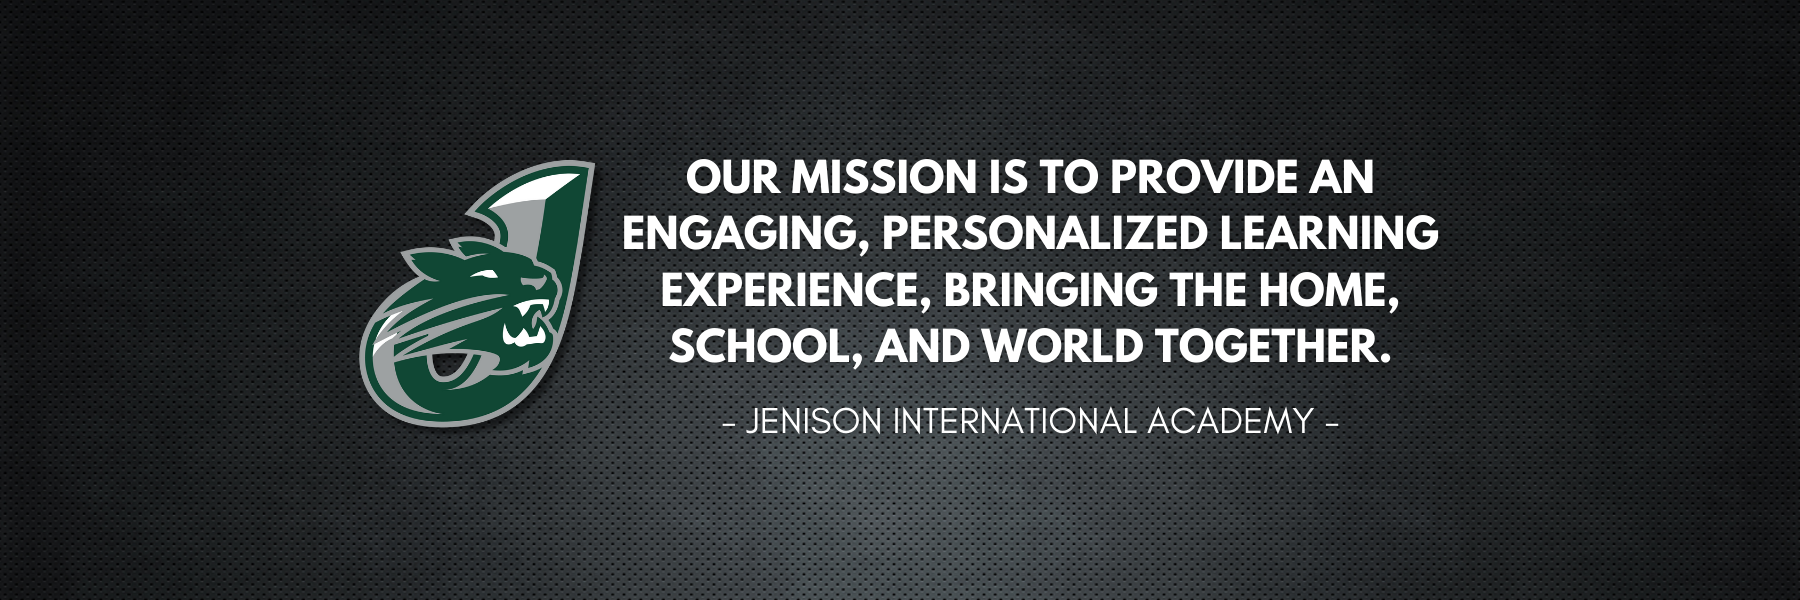 JIA Mission Statement: Our mission is to provide an engaging, personalized learning experience, bringing the home, school, and world together.